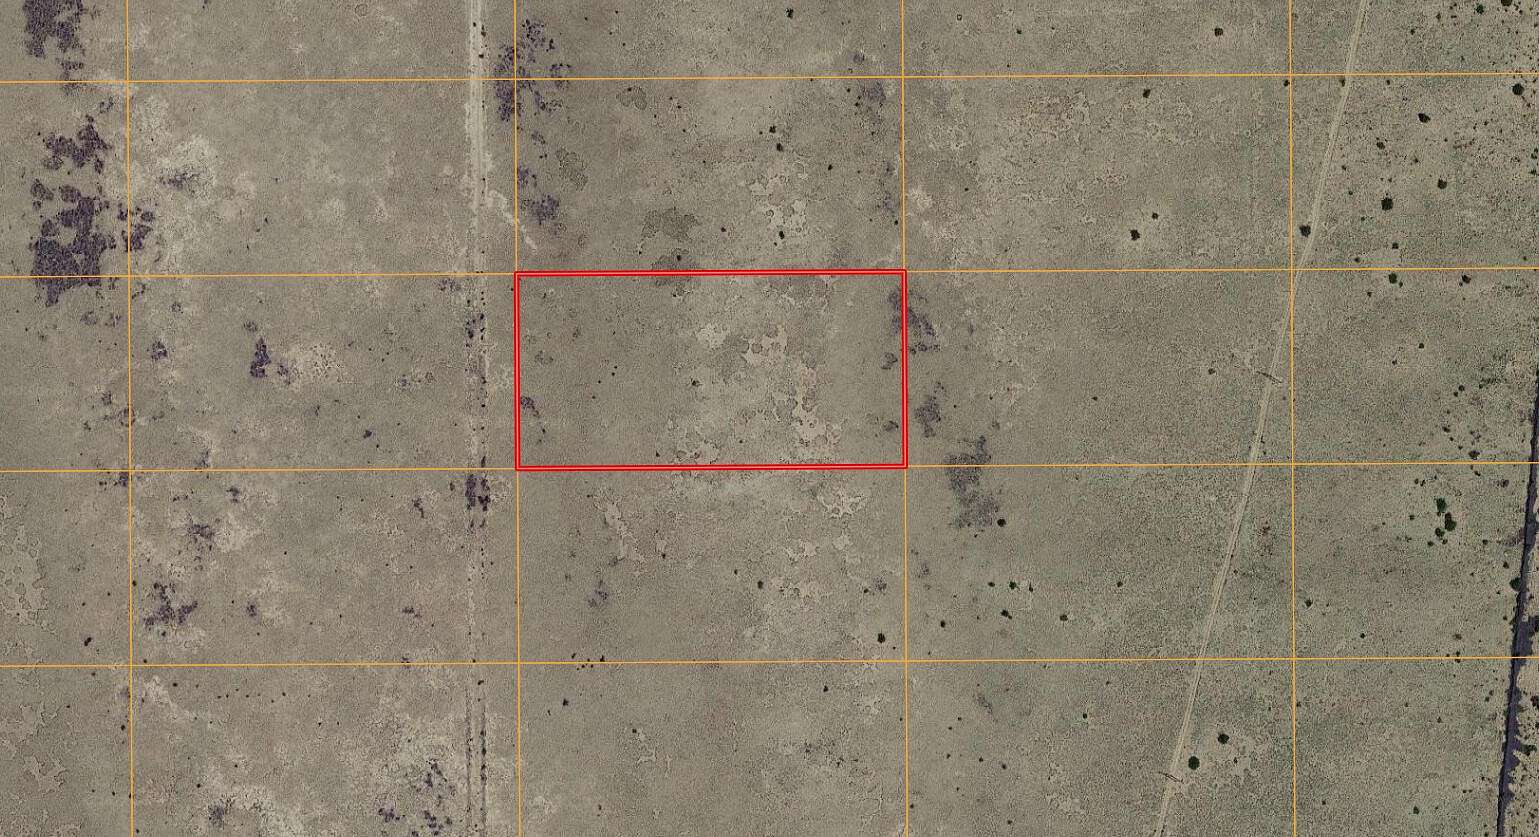 5 Acres of Land for Sale in Bosque, New Mexico